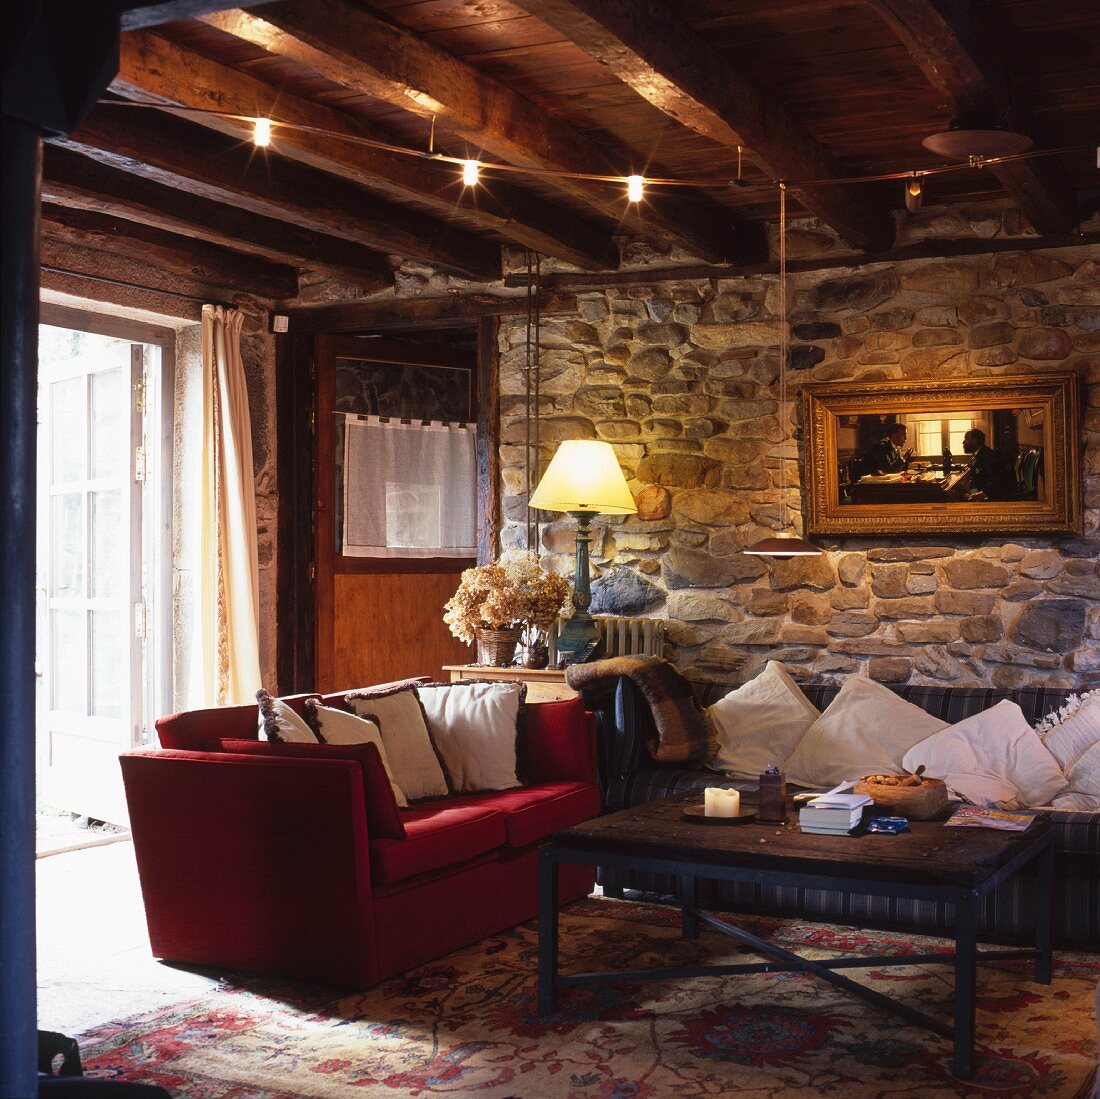 Old, living room in a country home with red couch and a sofa decorated with pillows in front of a natural stone wall